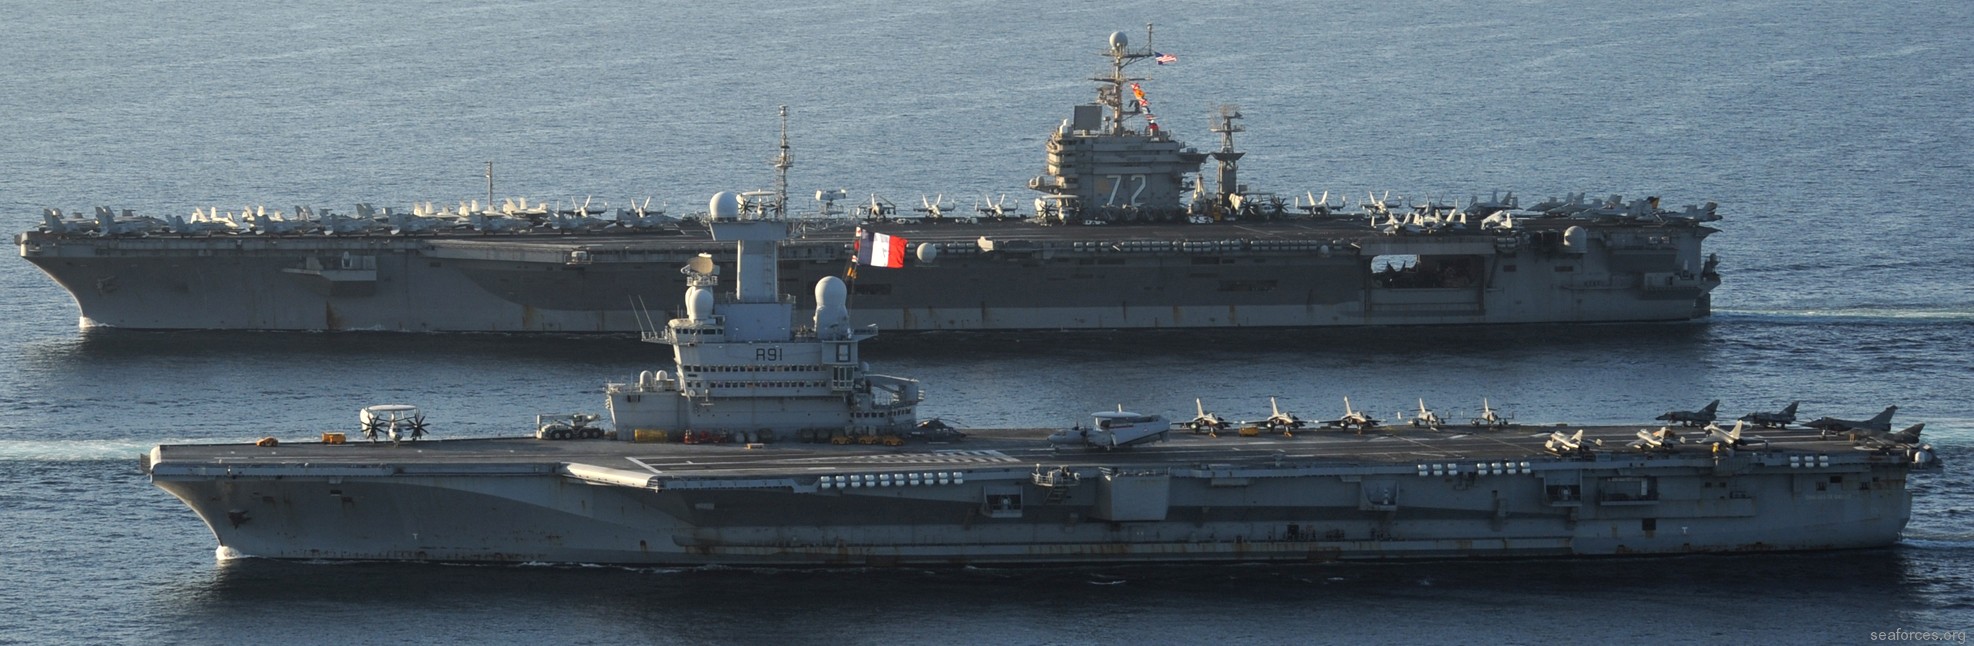  r-91 fs charles de gaulle aircraft carrier french navy 15